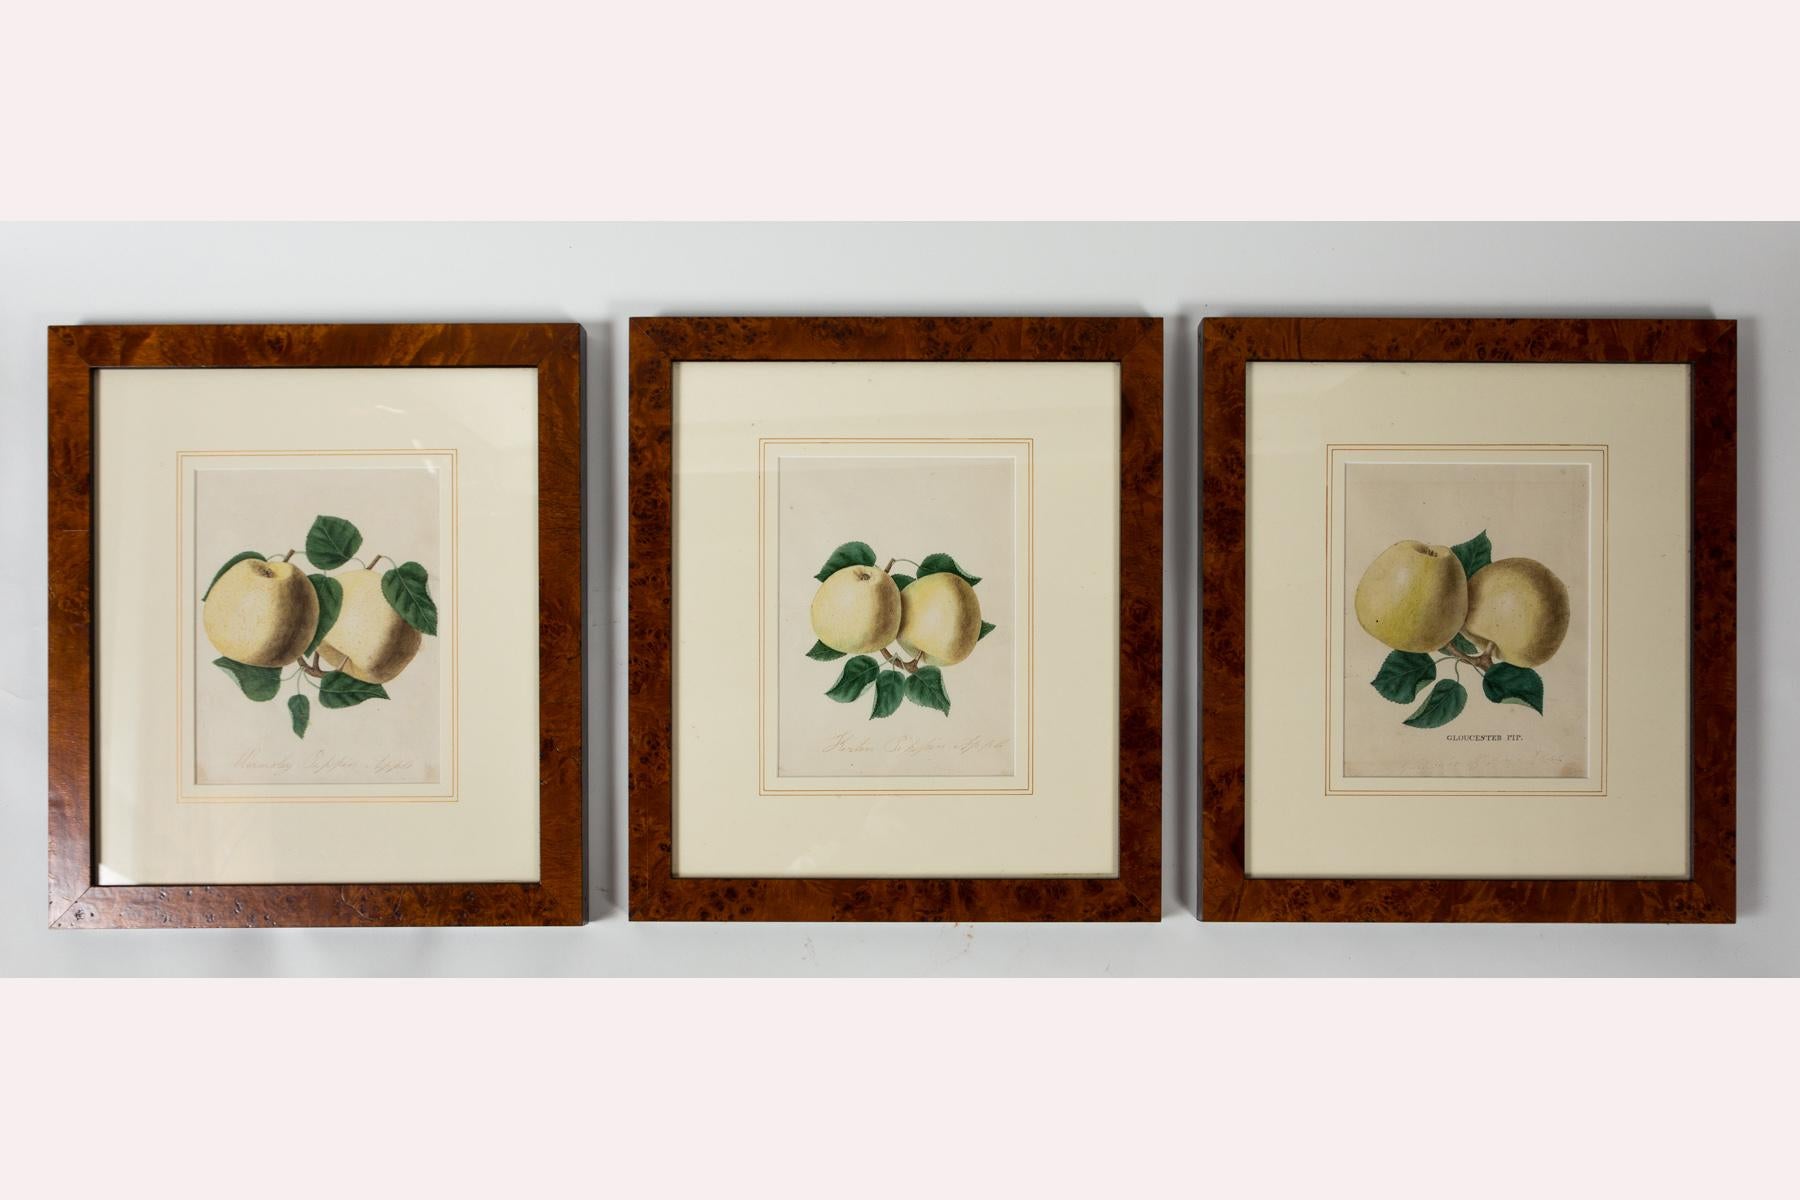 Set of 3 Apple Study Lithographs, early 20th Century. Hand-colored studies of apple varieties. Professionally framed and matted.